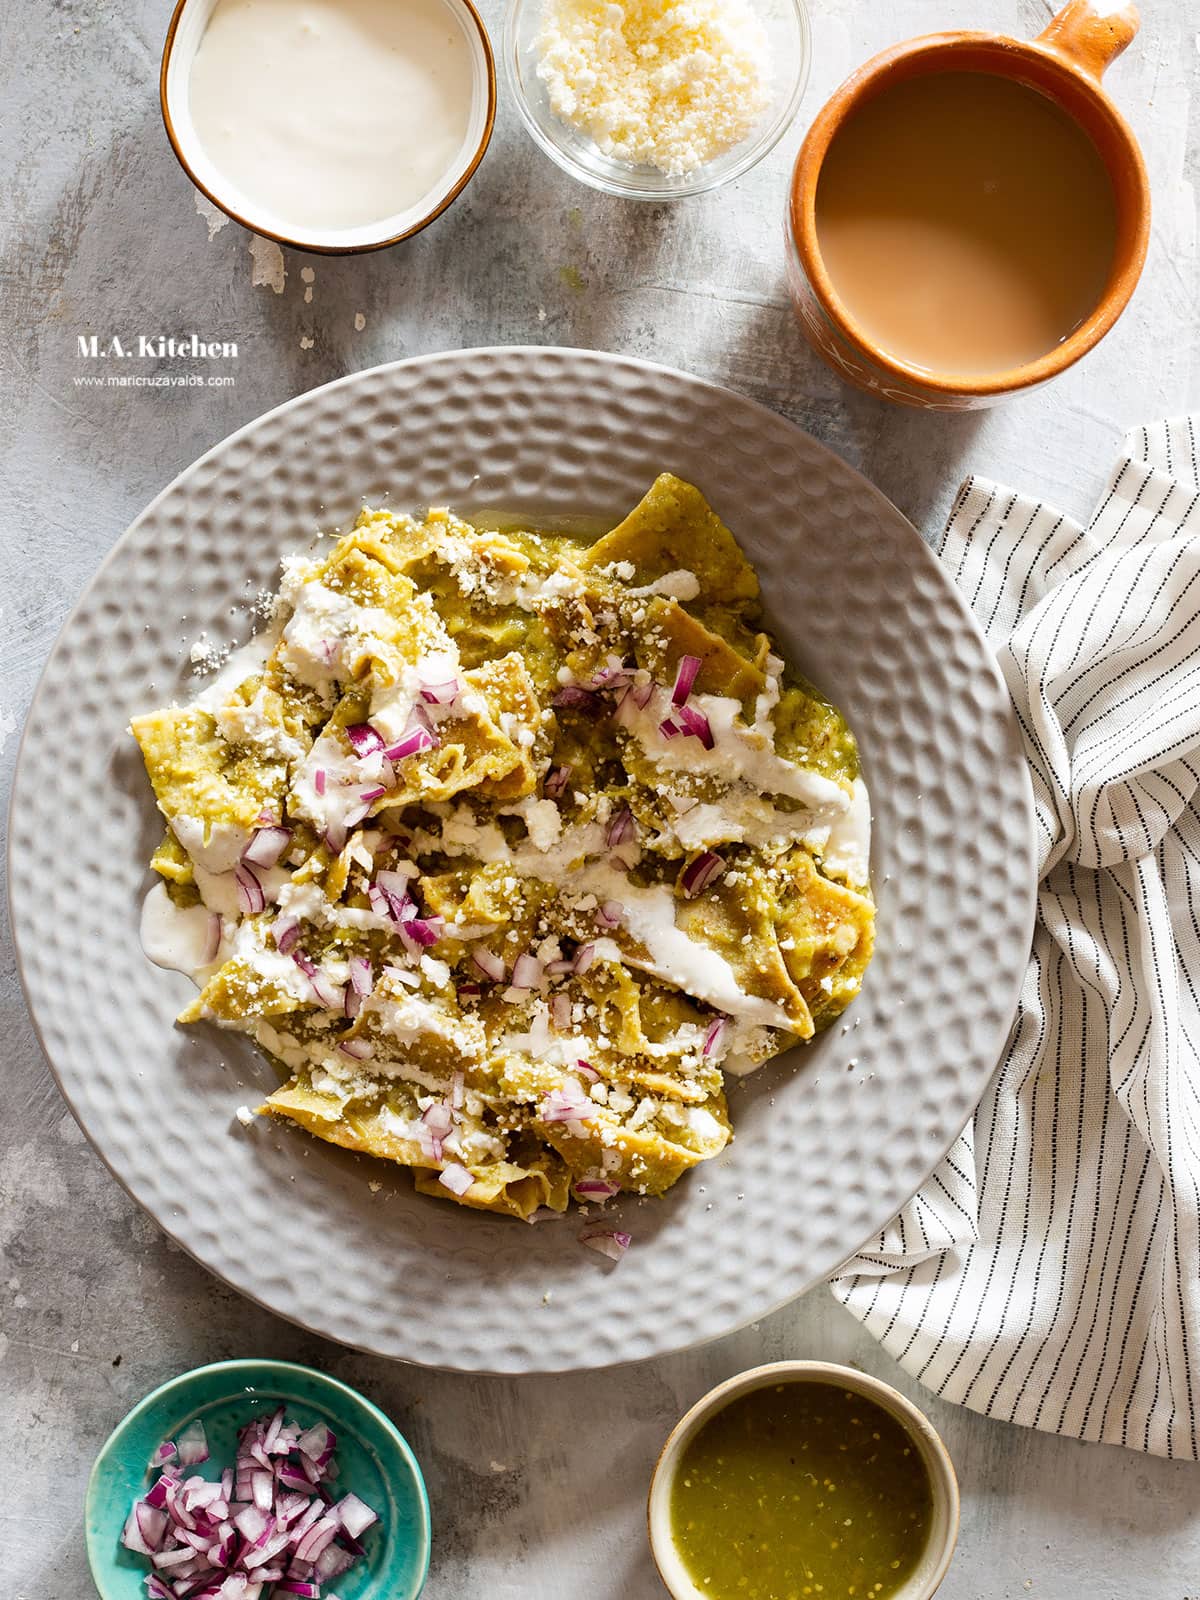 Chilaquiles verdes on a plate, more toppings on the side and a cup of cafe con leche.